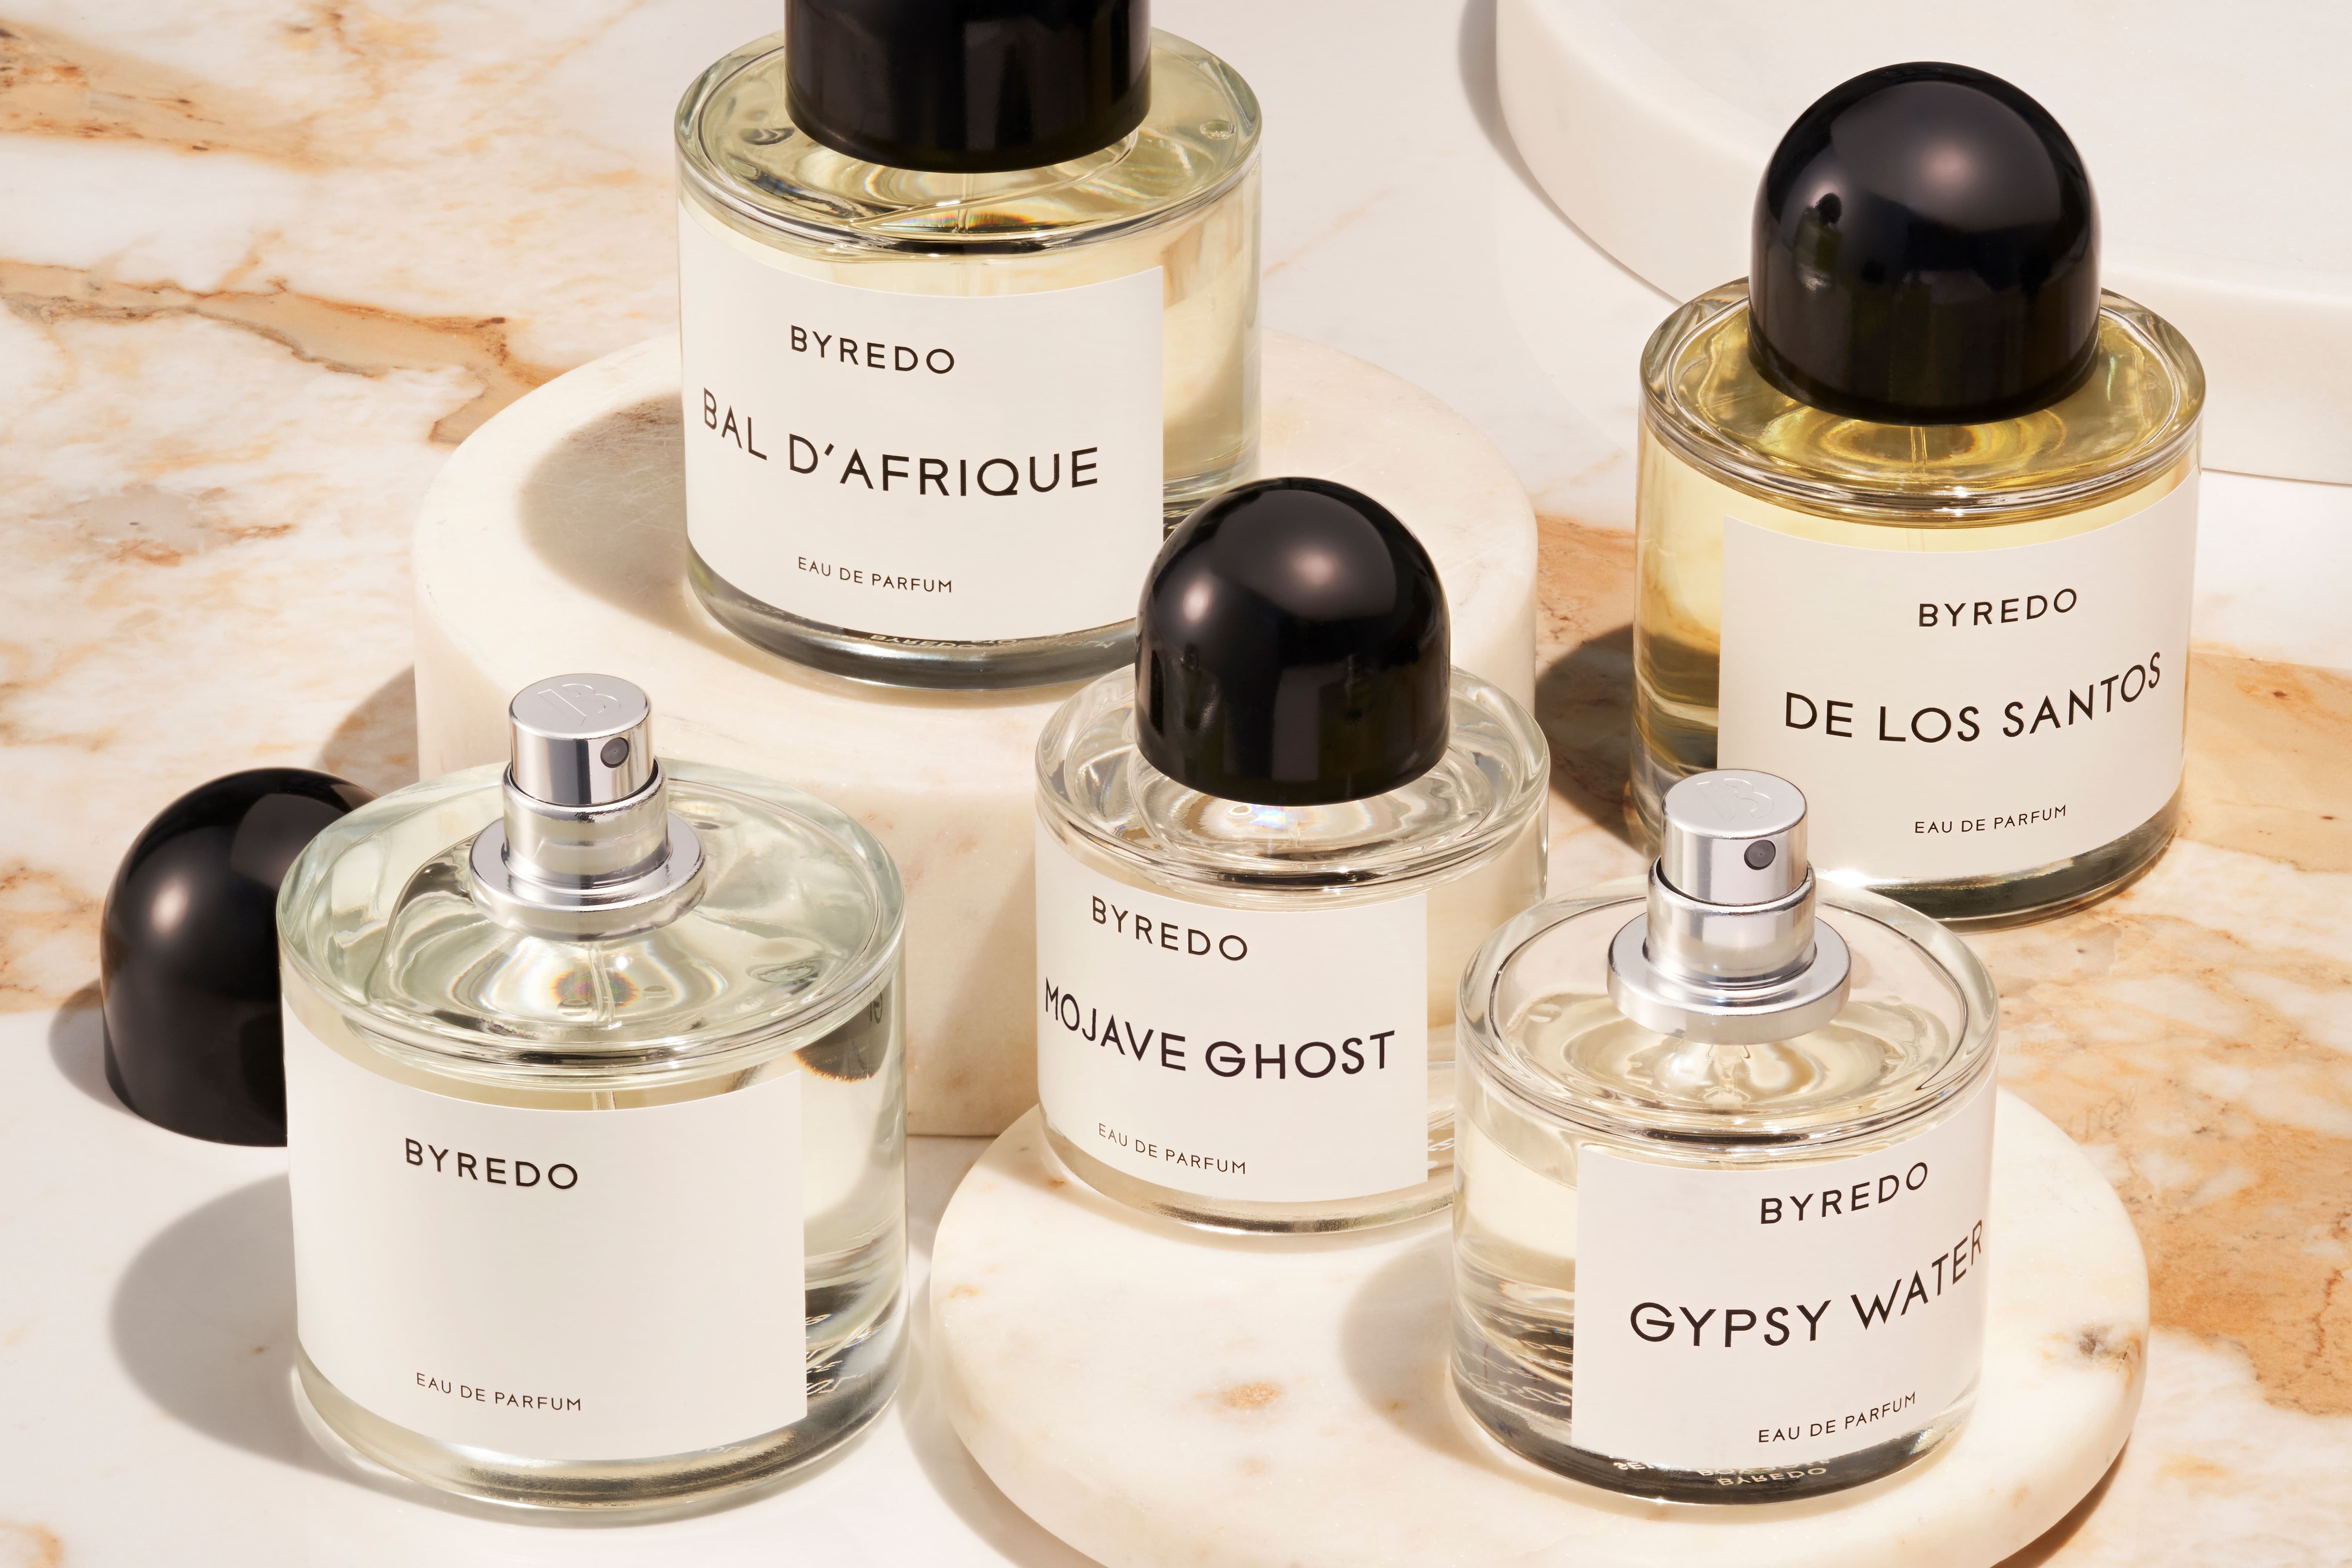 11 Best Byredo Fragrances and What They Smell Like